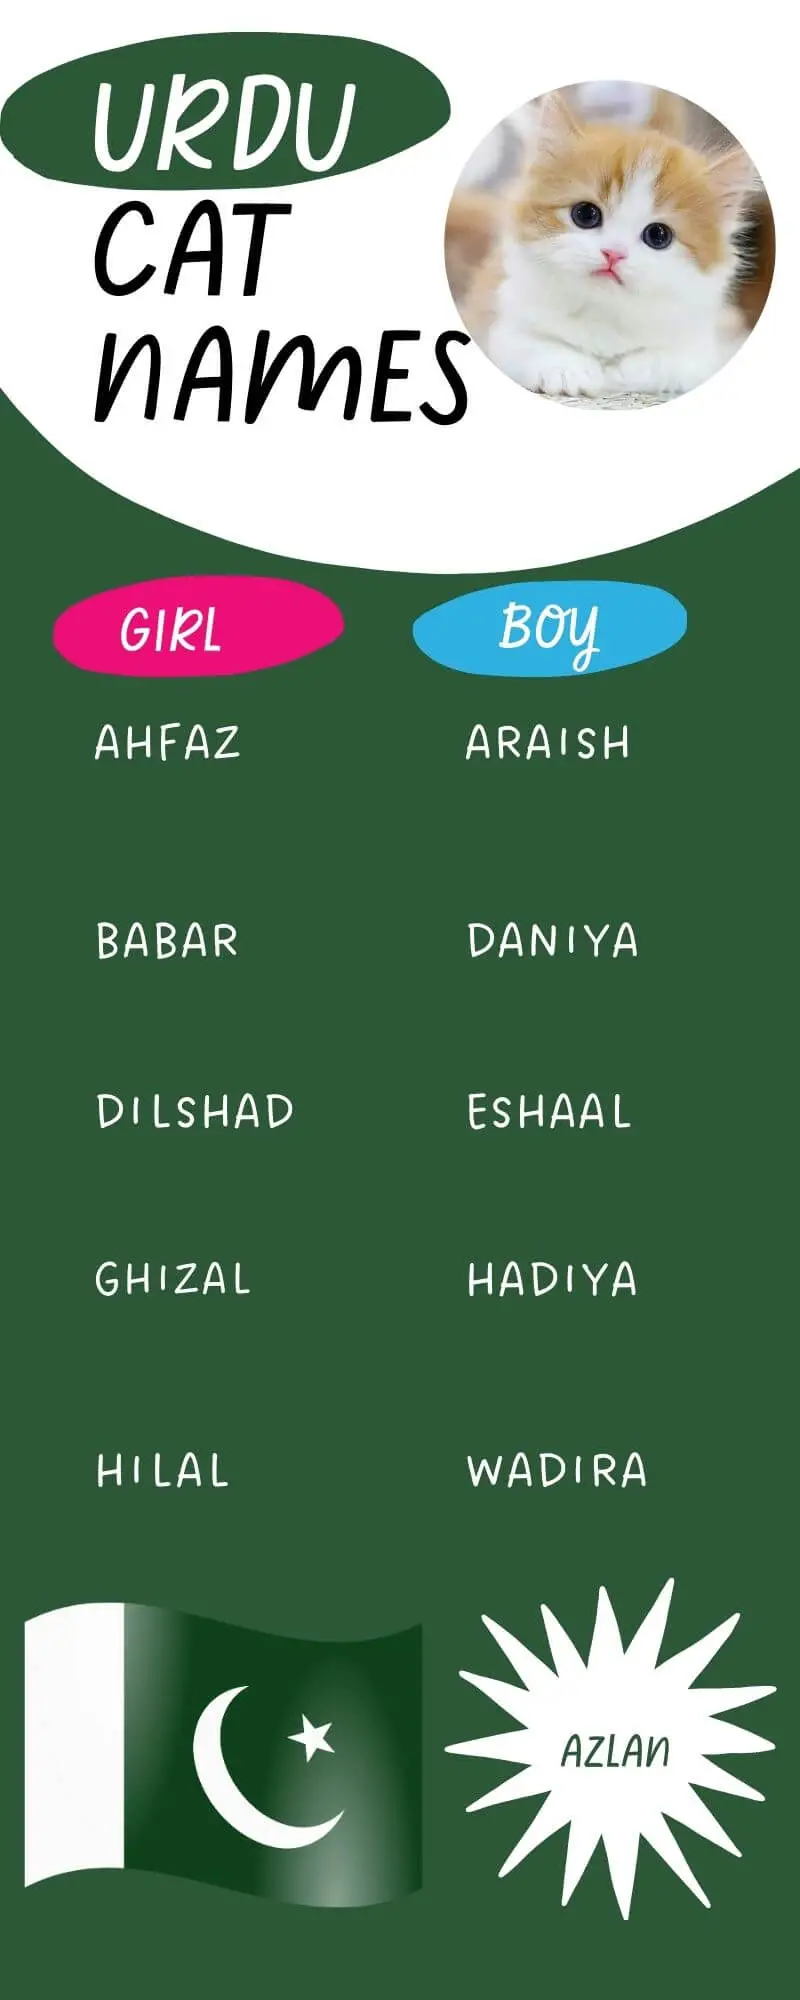 A List of 11 Urdu  Names for Cats  Infographic